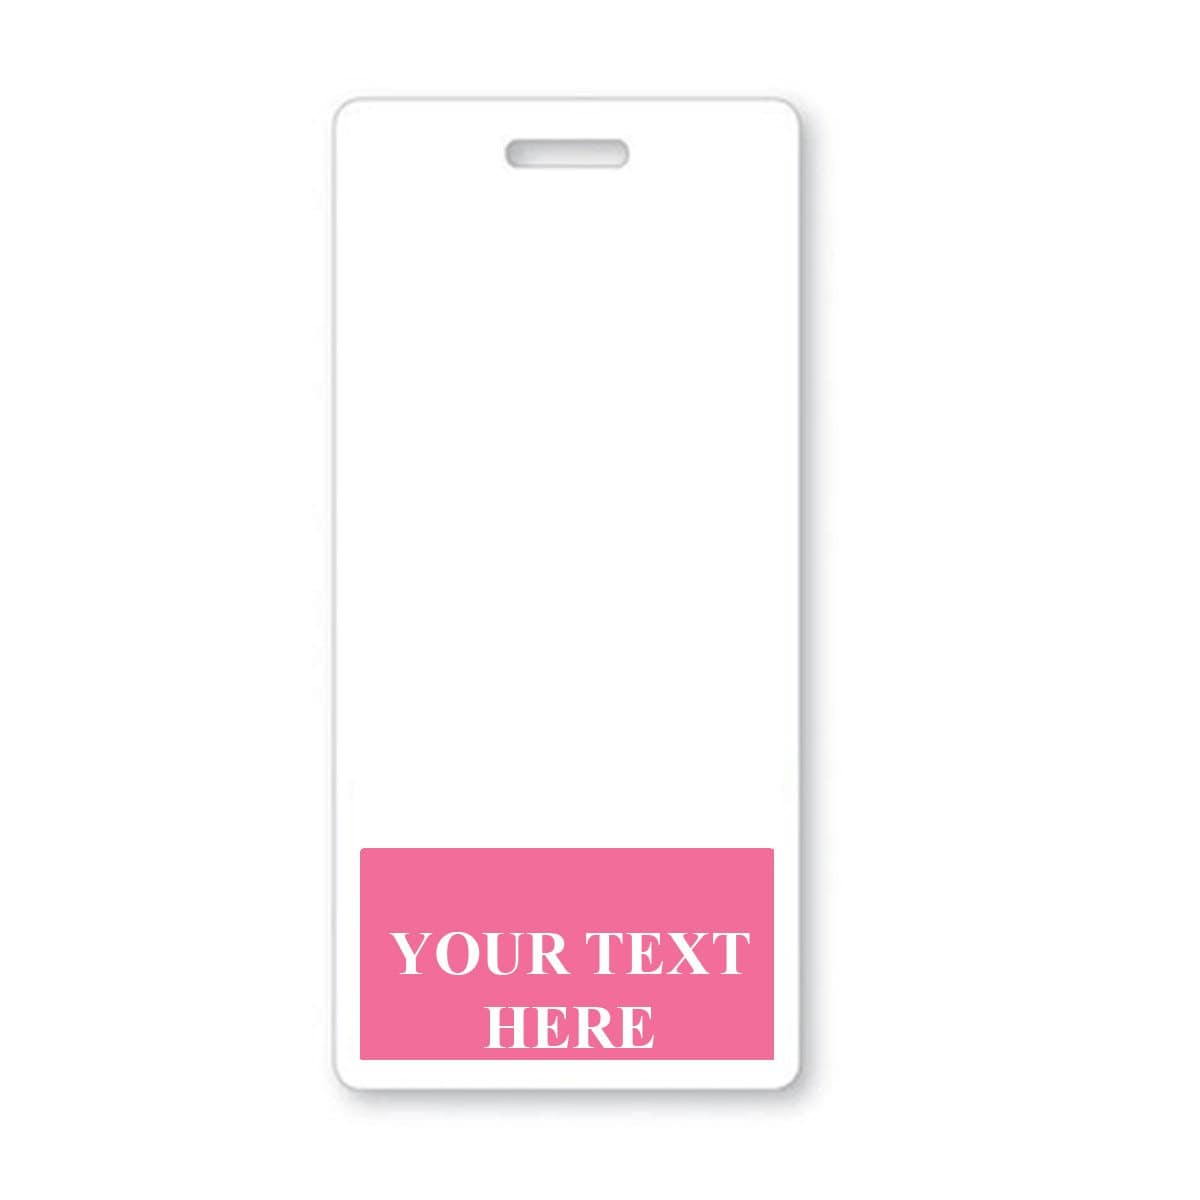 Rectangular identification badge with a slot for a lanyard at the top. Blank white space in the center with a pink rectangle at the bottom containing the text "YOUR TEXT HERE" in white. Perfect for Custom Printed Badge Buddy Vertical (Standard Size), ensuring instant role recognition.